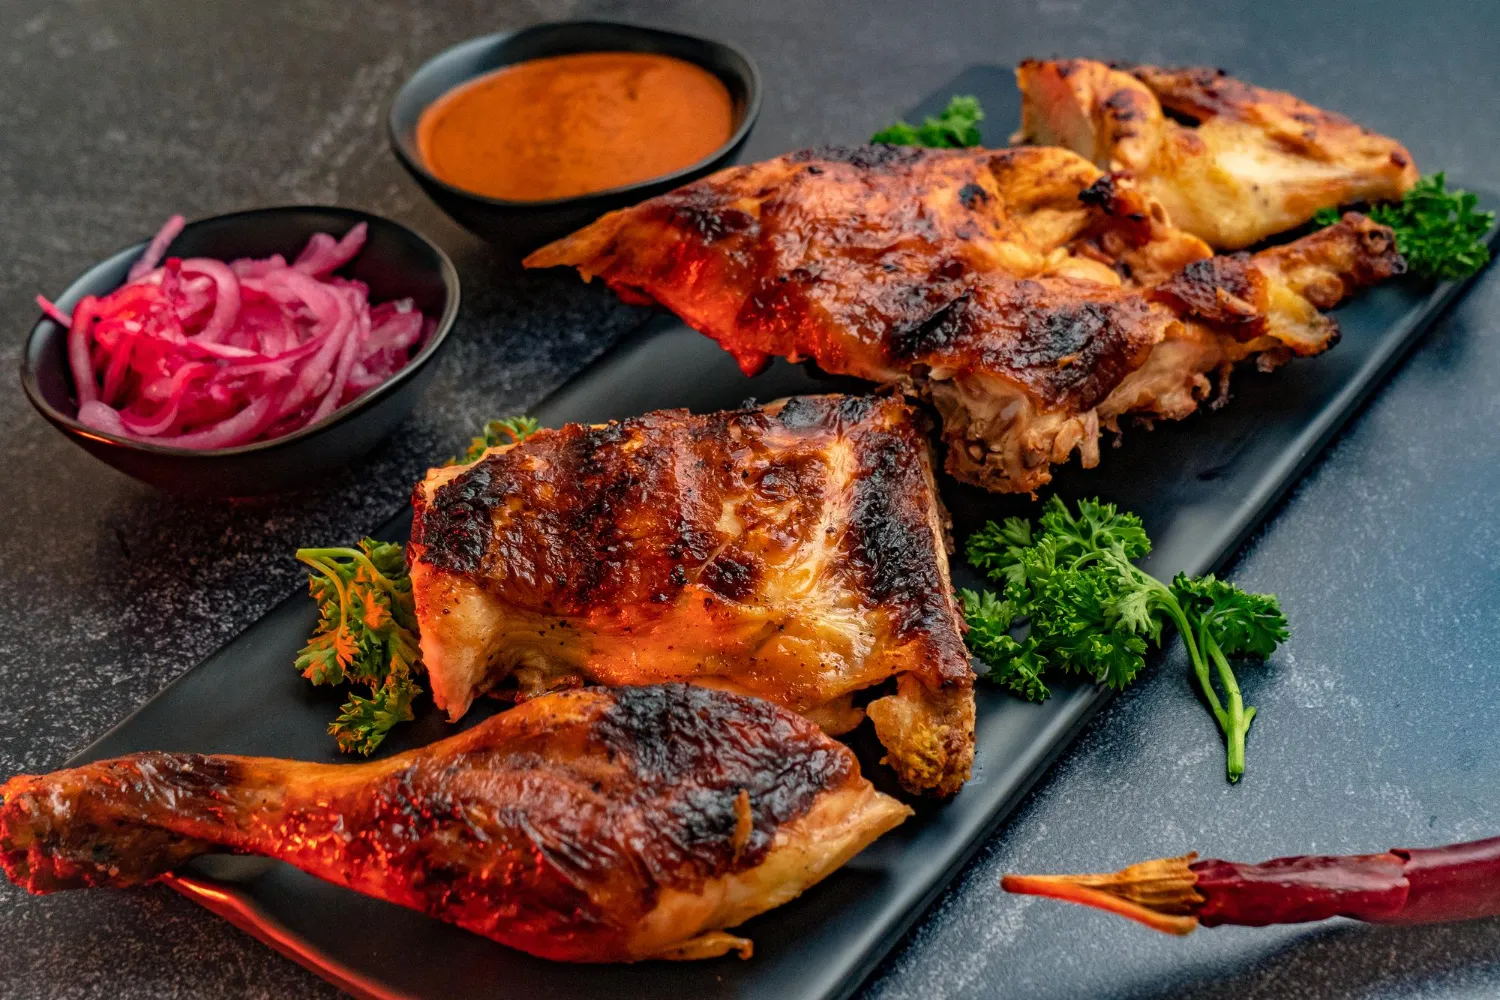 Why Tandoori Chicken is So Red